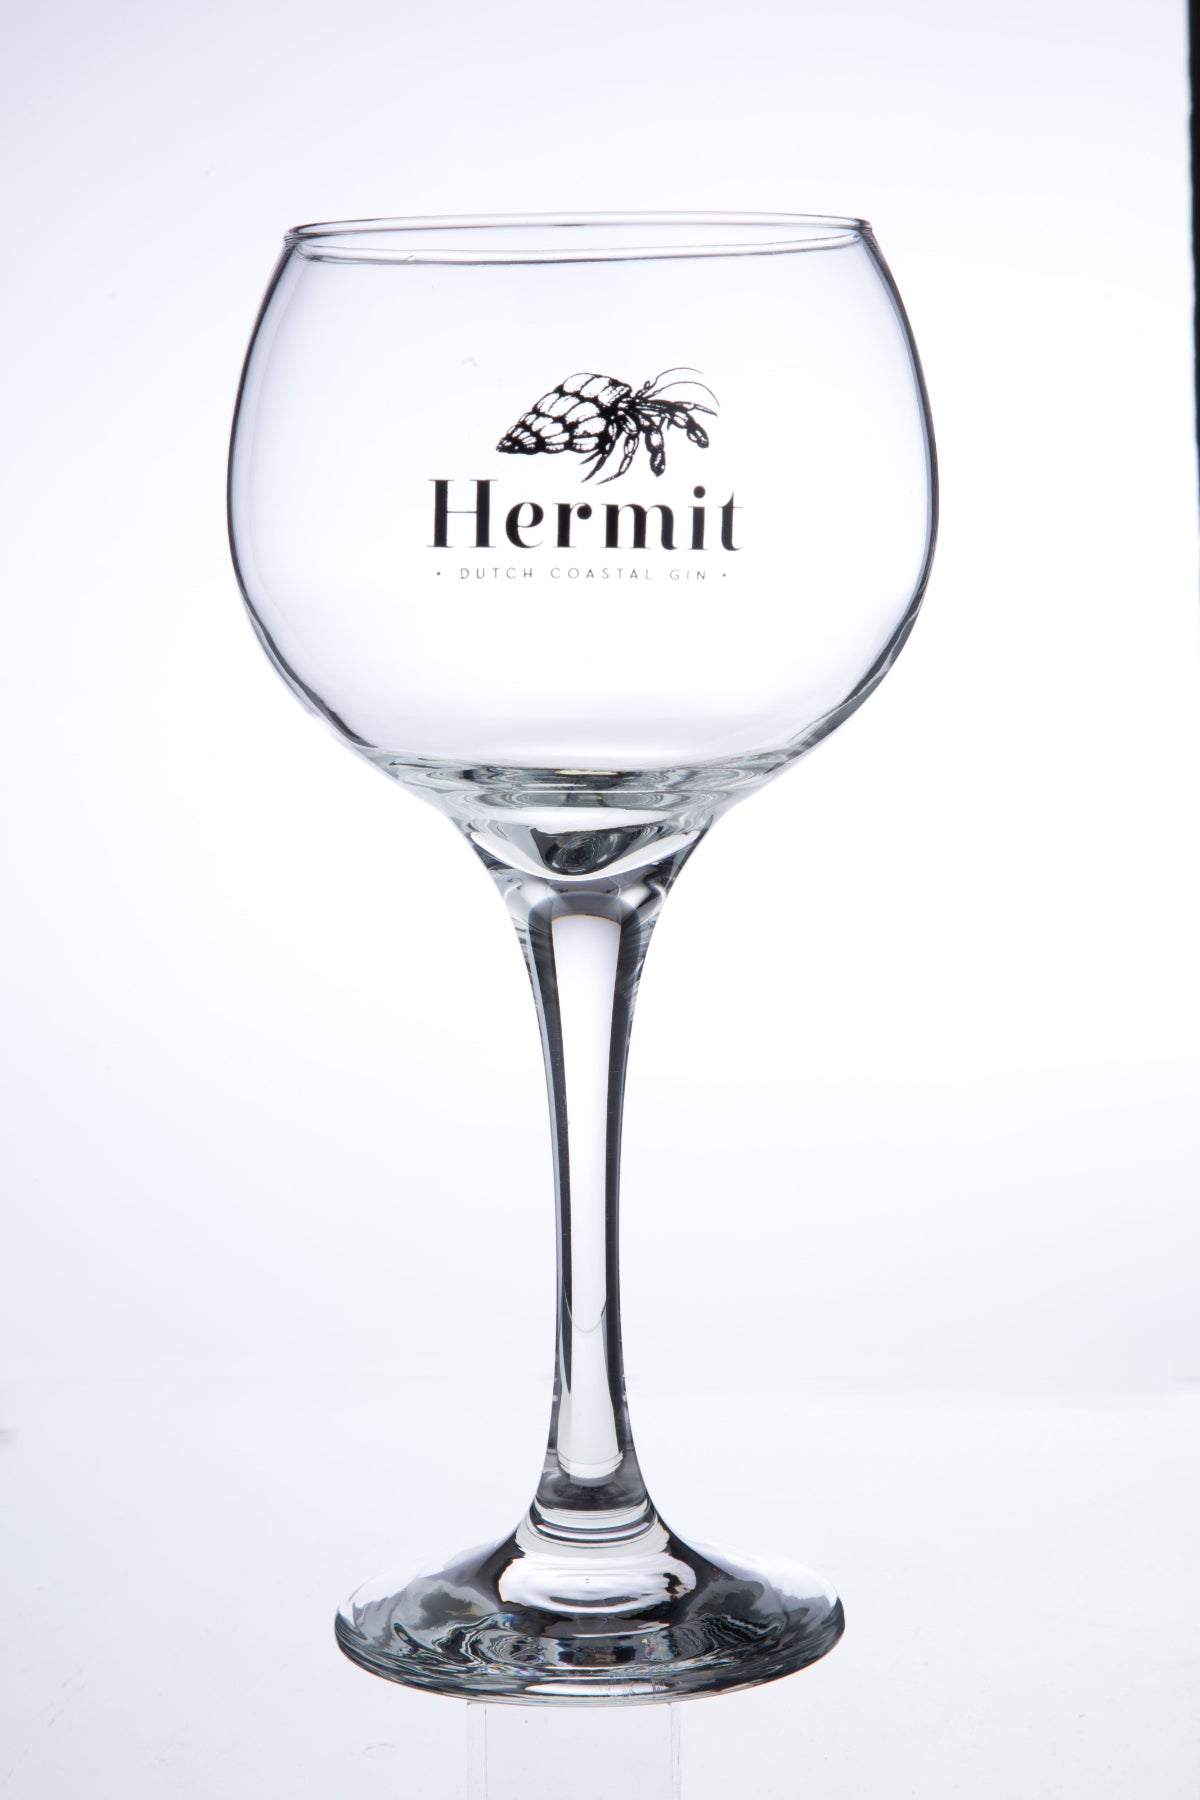 Hermit Gin Hermit Gin gin and tonic glass x 6 case